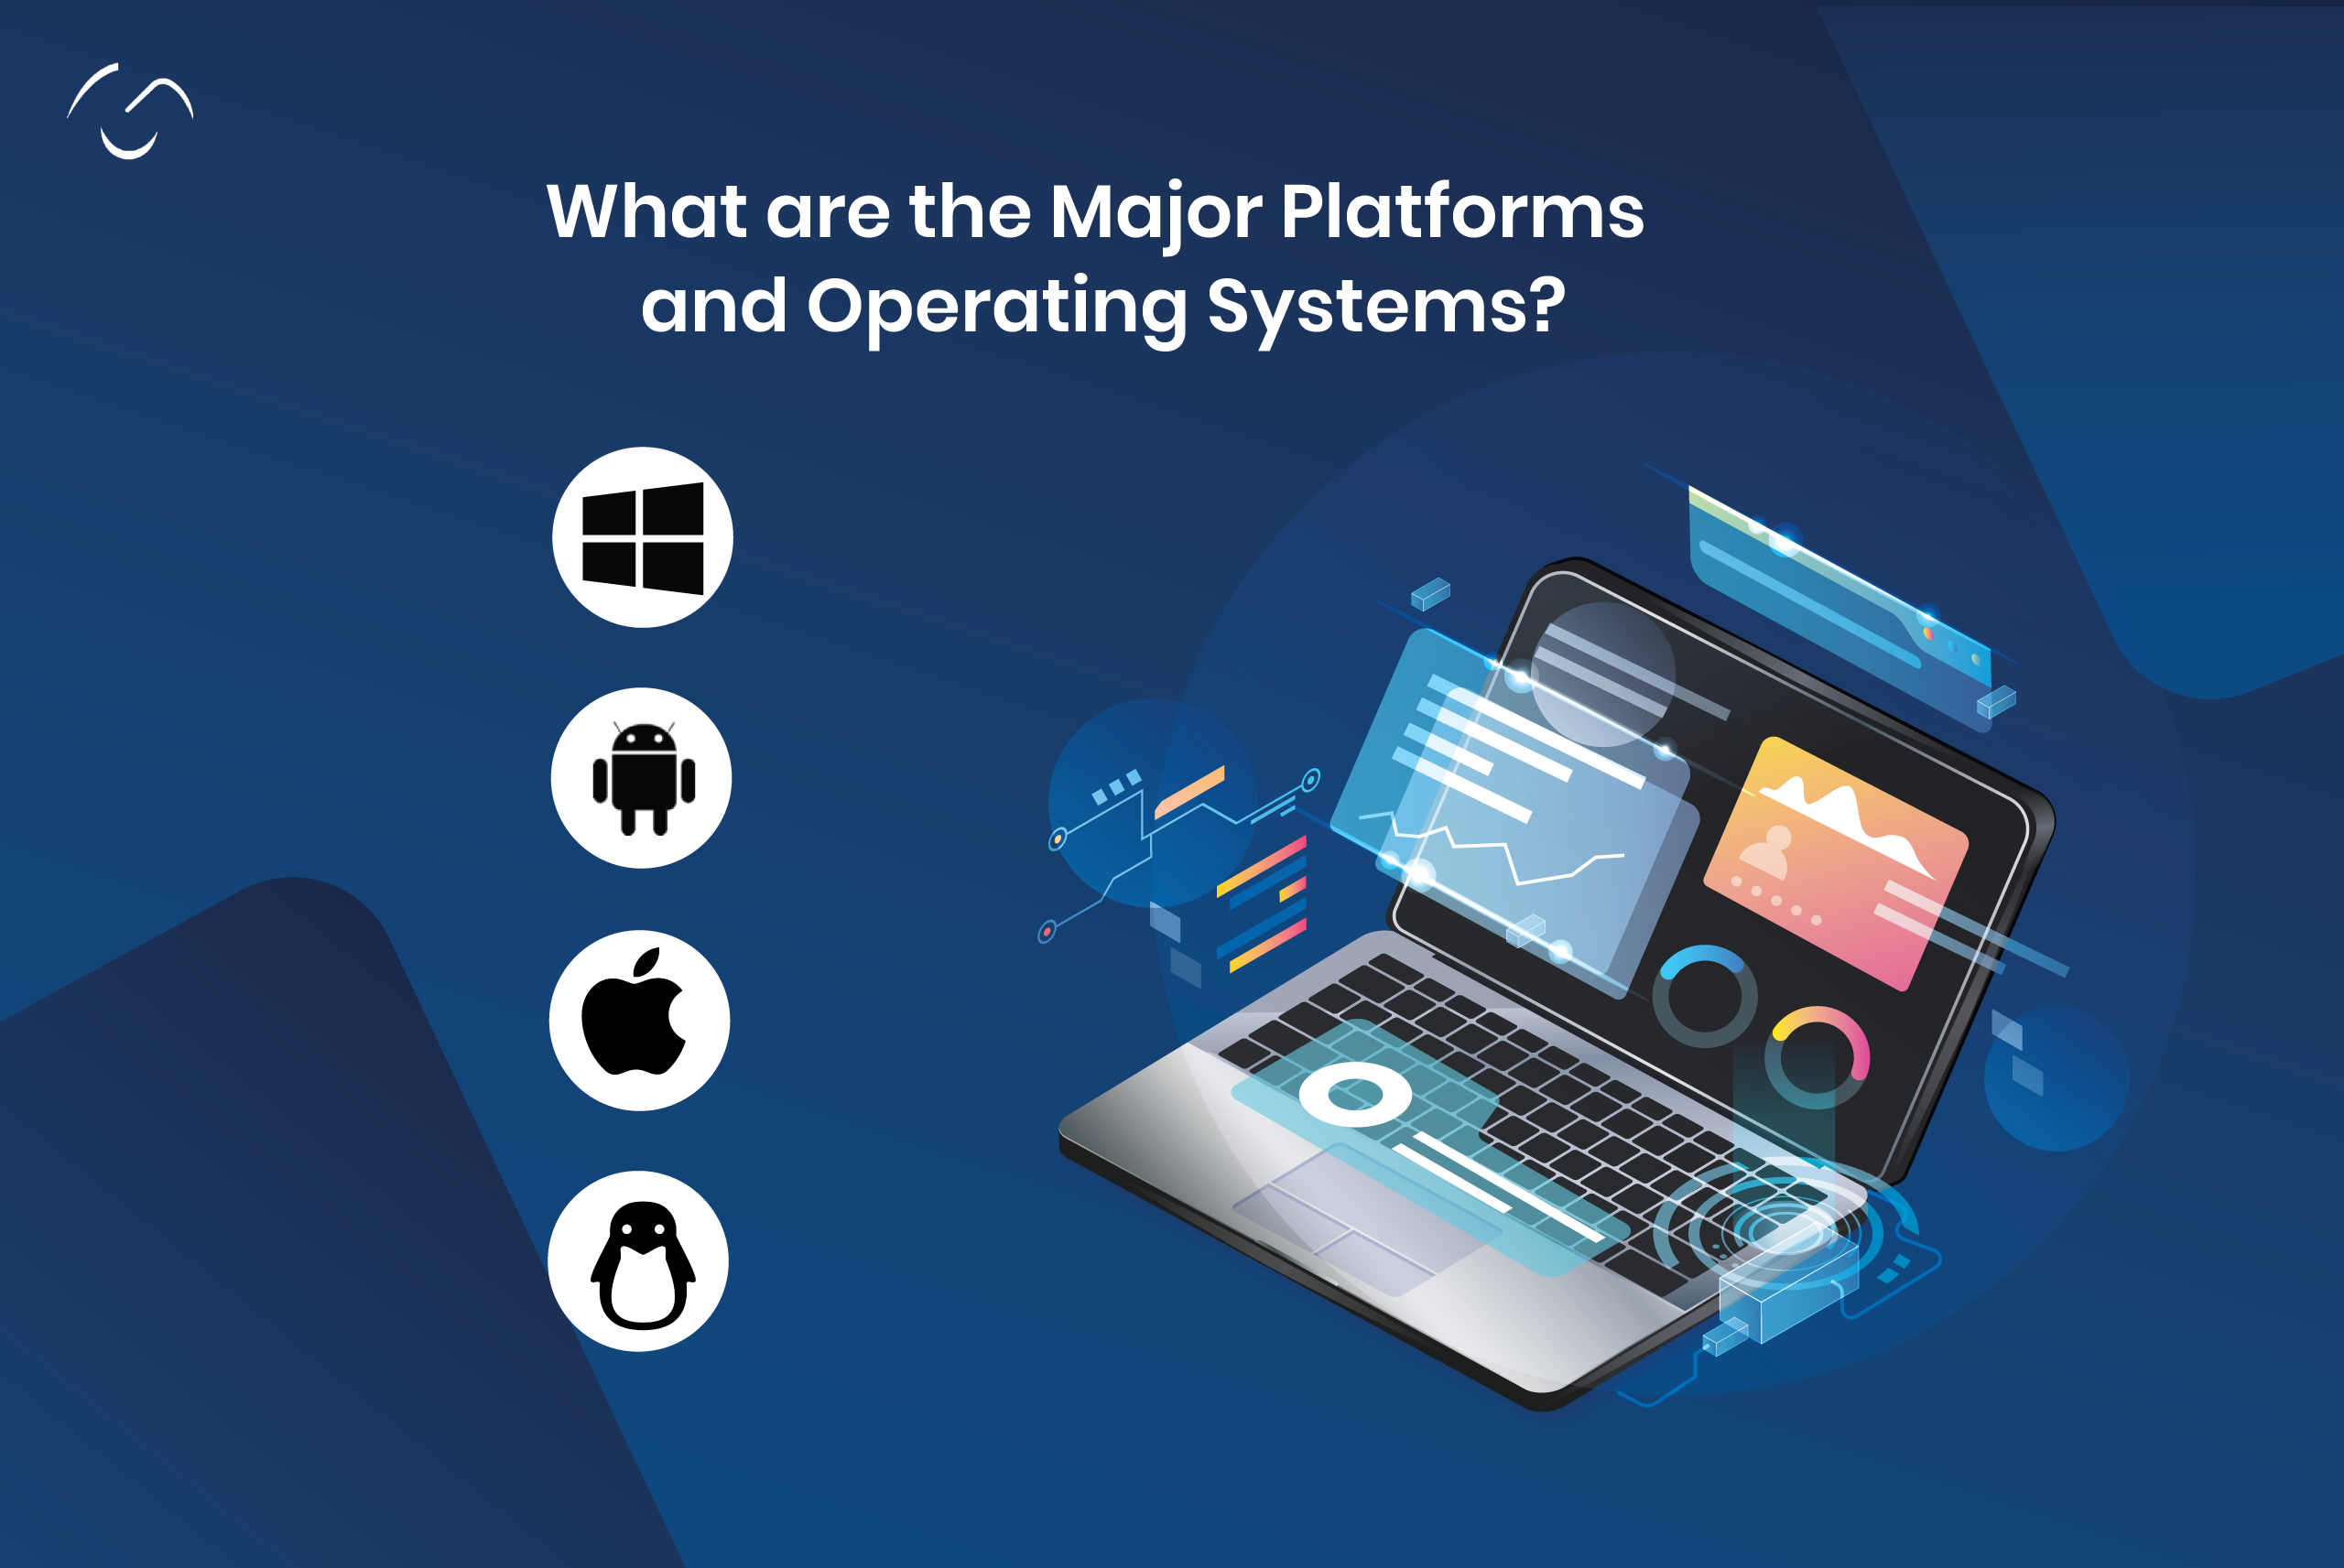 Major Platforms and Operating Systems